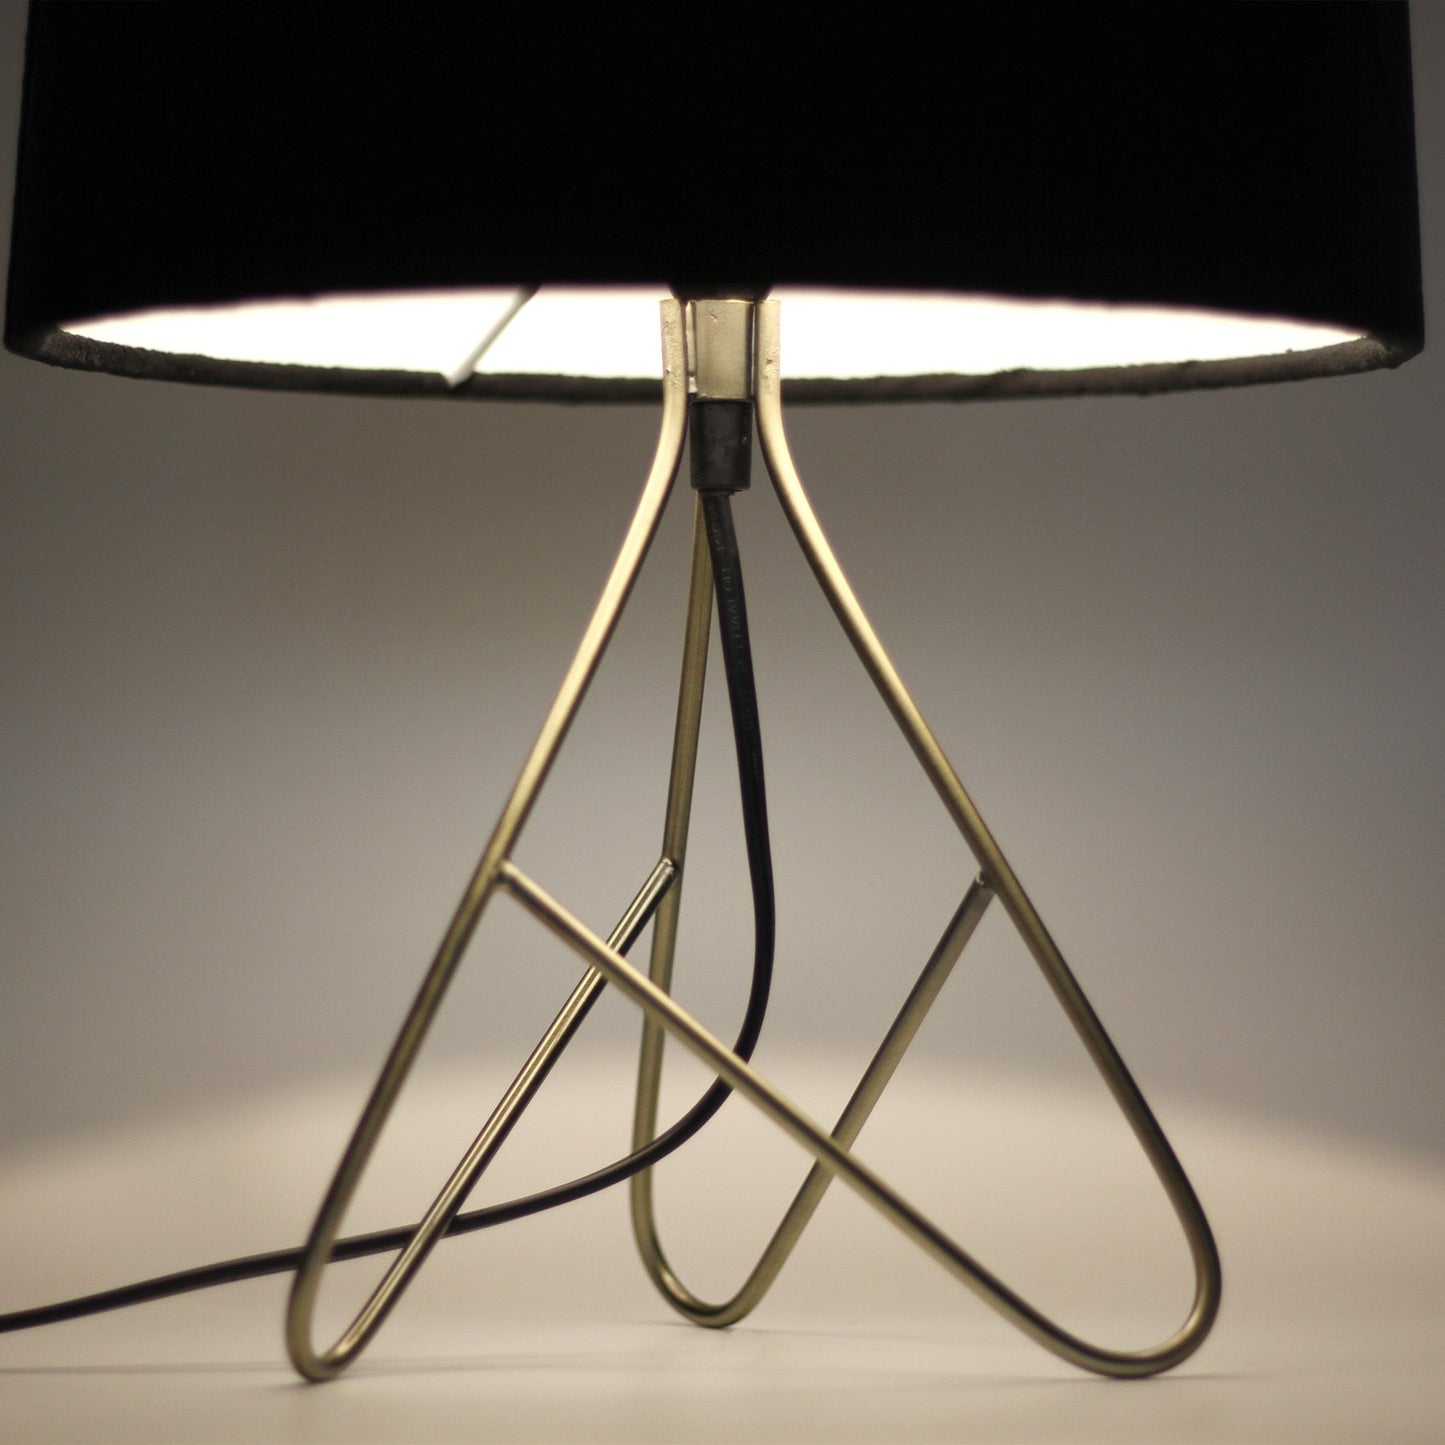 Table Lamp - Antique Brass